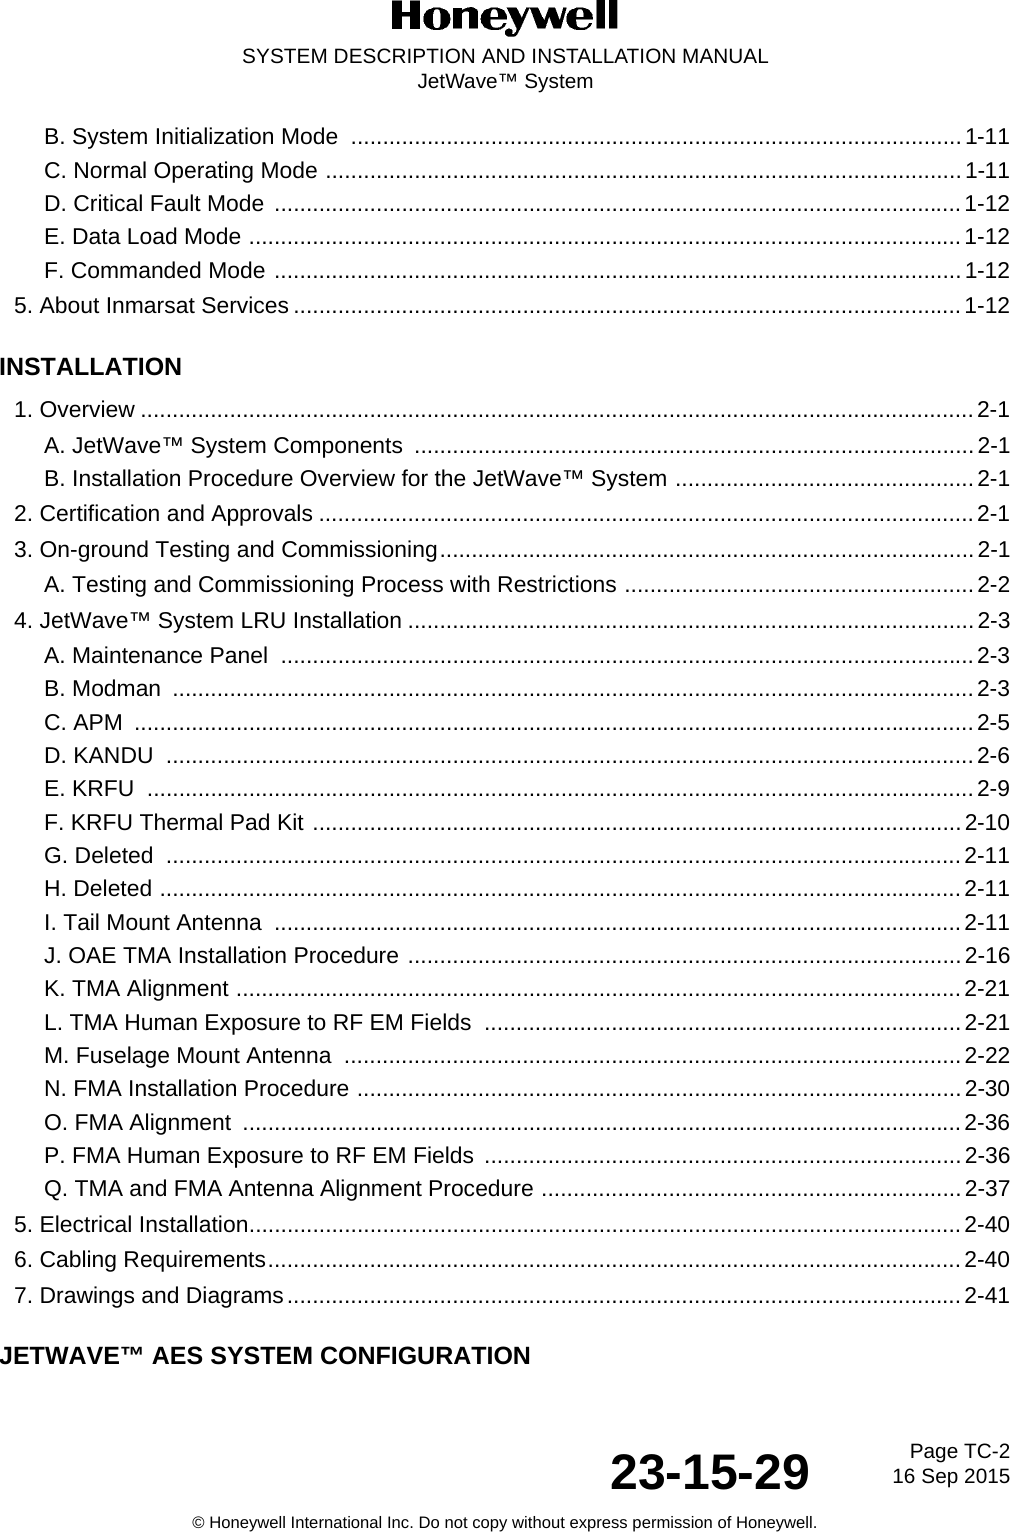 Page TC-2 16 Sep 201523-15-29SYSTEM DESCRIPTION AND INSTALLATION MANUALJetWave™ System© Honeywell International Inc. Do not copy without express permission of Honeywell.B. System Initialization Mode  ................................................................................................1-11C. Normal Operating Mode ....................................................................................................1-11D. Critical Fault Mode ............................................................................................................1-12E. Data Load Mode ................................................................................................................1-12F. Commanded Mode ............................................................................................................1-125. About Inmarsat Services .........................................................................................................1-12INSTALLATION1. Overview ...................................................................................................................................2-1A. JetWave™ System Components  ........................................................................................2-1B. Installation Procedure Overview for the JetWave™ System ...............................................2-12. Certification and Approvals .......................................................................................................2-13. On-ground Testing and Commissioning....................................................................................2-1A. Testing and Commissioning Process with Restrictions .......................................................2-24. JetWave™ System LRU Installation .........................................................................................2-3A. Maintenance Panel  ............................................................................................................. 2-3B. Modman  ..............................................................................................................................2-3C. APM  ....................................................................................................................................2-5D. KANDU  ...............................................................................................................................2-6E. KRFU  ..................................................................................................................................2-9F. KRFU Thermal Pad Kit ......................................................................................................2-10G. Deleted  ............................................................................................................................. 2-11H. Deleted ..............................................................................................................................2-11I. Tail Mount Antenna  ............................................................................................................2-11J. OAE TMA Installation Procedure .......................................................................................2-16K. TMA Alignment ..................................................................................................................2-21L. TMA Human Exposure to RF EM Fields  ...........................................................................2-21M. Fuselage Mount Antenna  .................................................................................................2-22N. FMA Installation Procedure ...............................................................................................2-30O. FMA Alignment  ................................................................................................................. 2-36P. FMA Human Exposure to RF EM Fields ...........................................................................2-36Q. TMA and FMA Antenna Alignment Procedure ..................................................................2-375. Electrical Installation................................................................................................................2-406. Cabling Requirements.............................................................................................................2-407. Drawings and Diagrams..........................................................................................................2-41JETWAVE™ AES SYSTEM CONFIGURATION